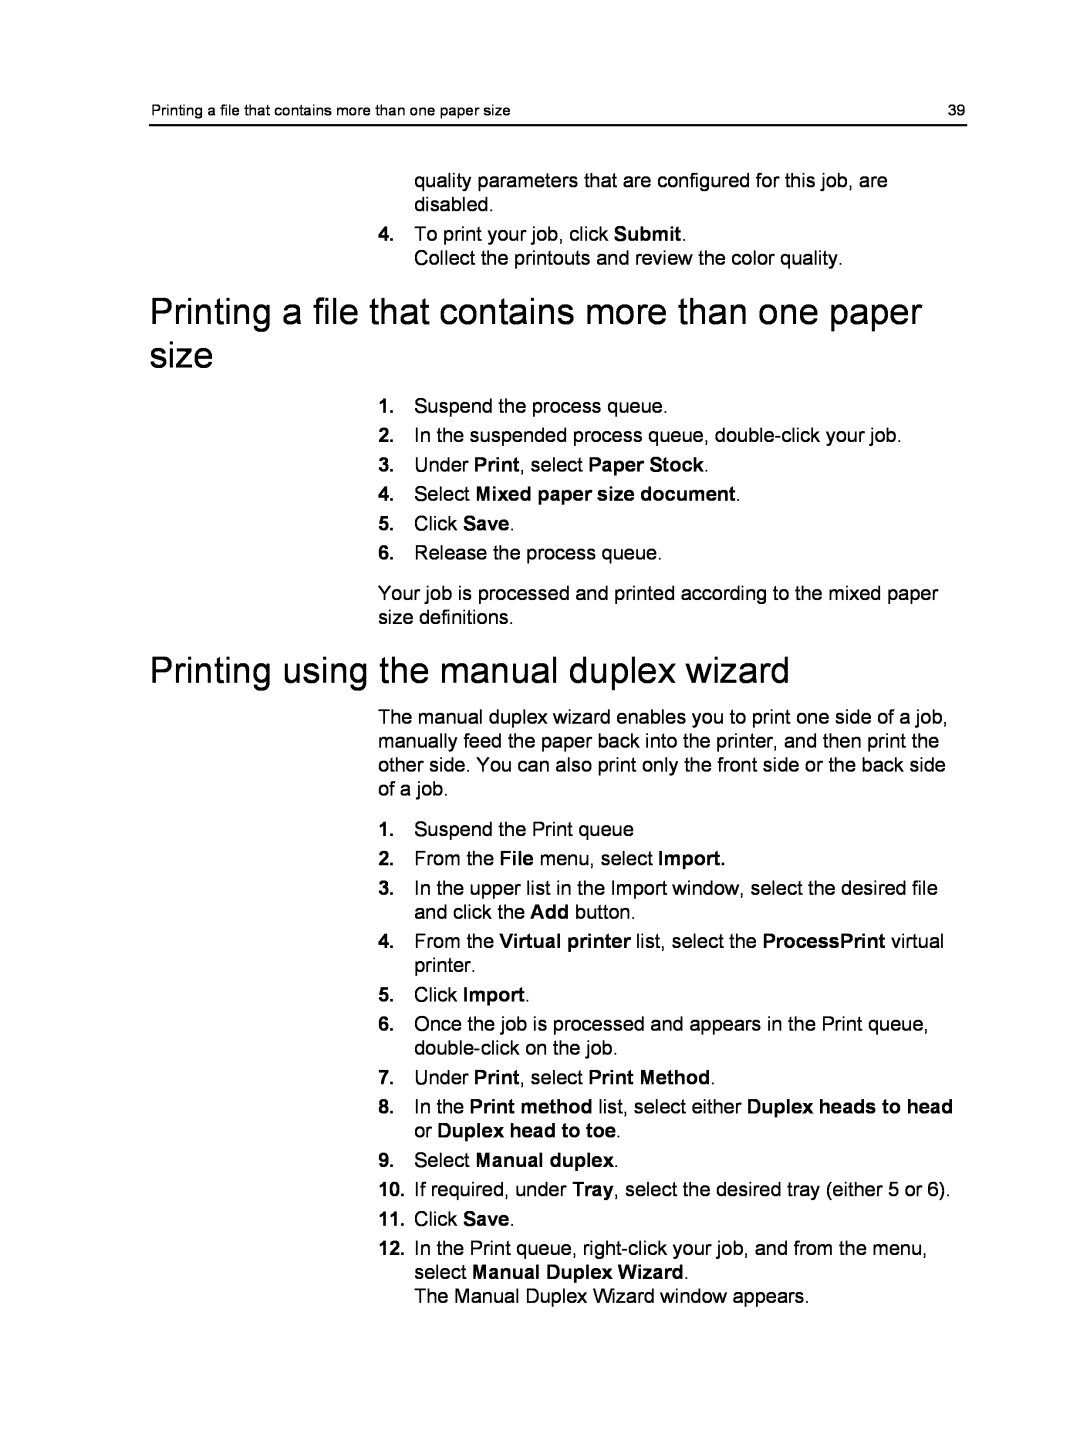 Xerox 550, 560 Printing using the manual duplex wizard, Select Mixed paper size document, Under Print, select Print Method 